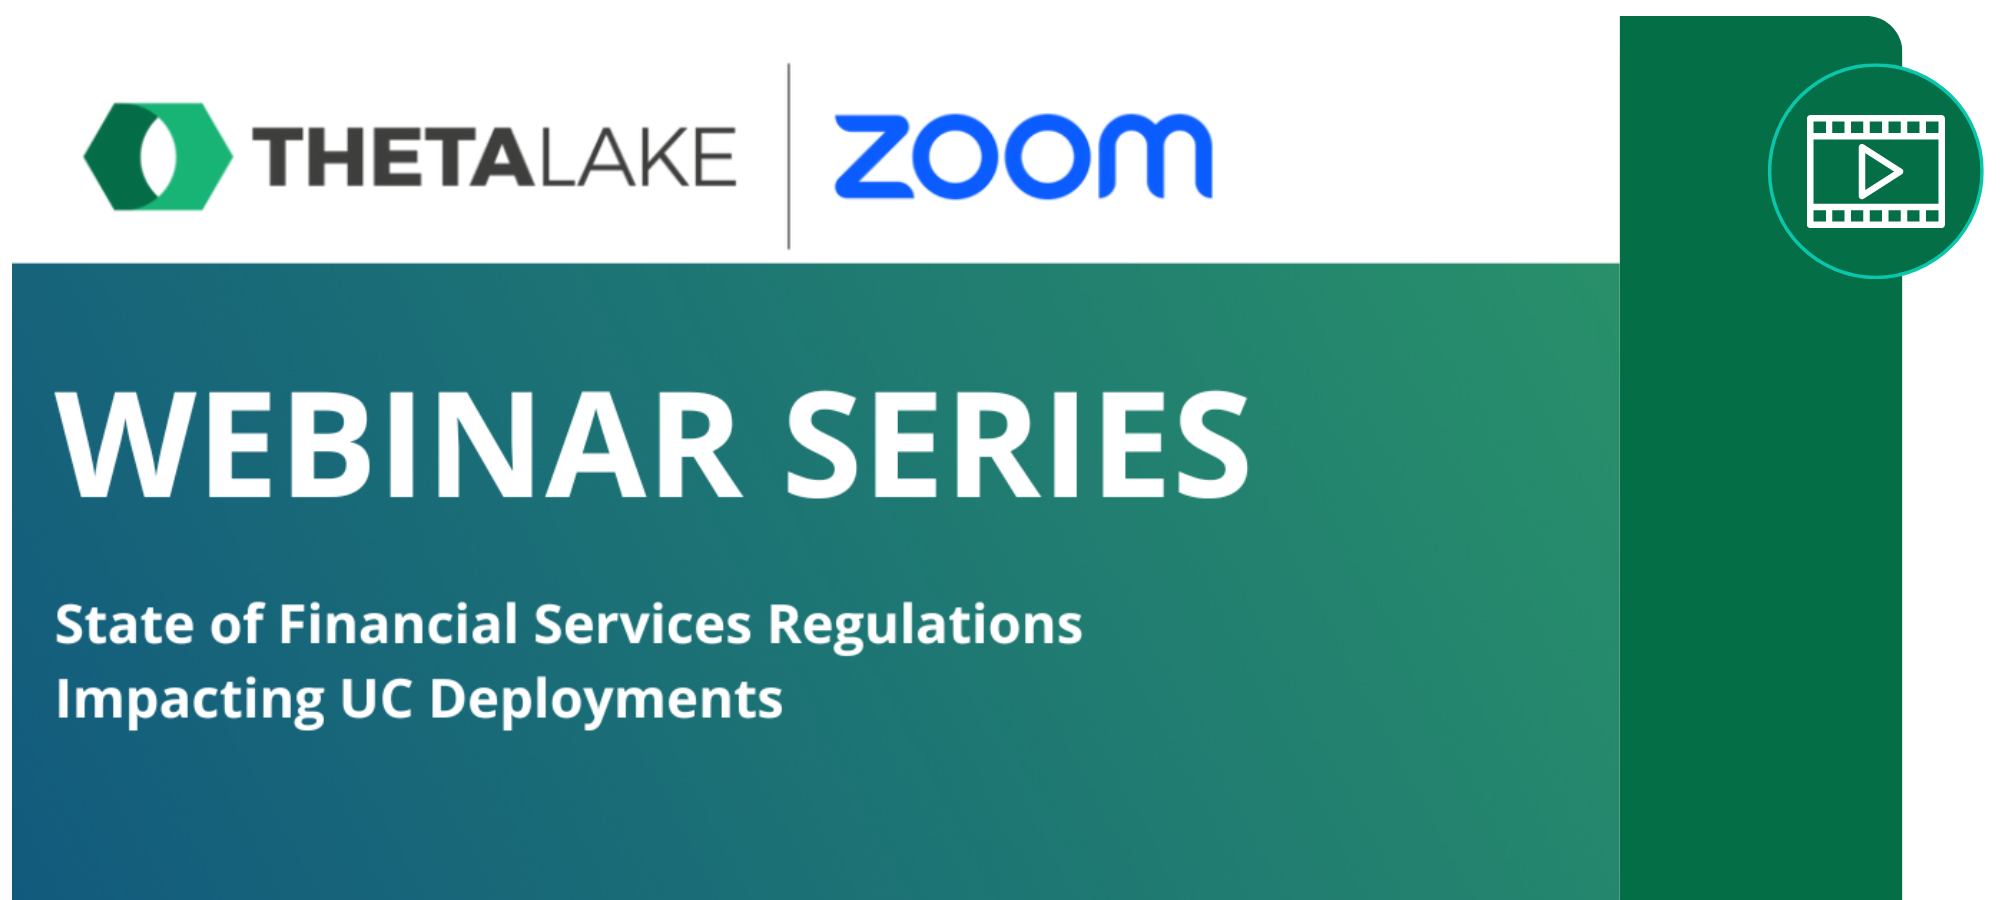 Webinar number1intheseries ThetaLake and Zoom 2023